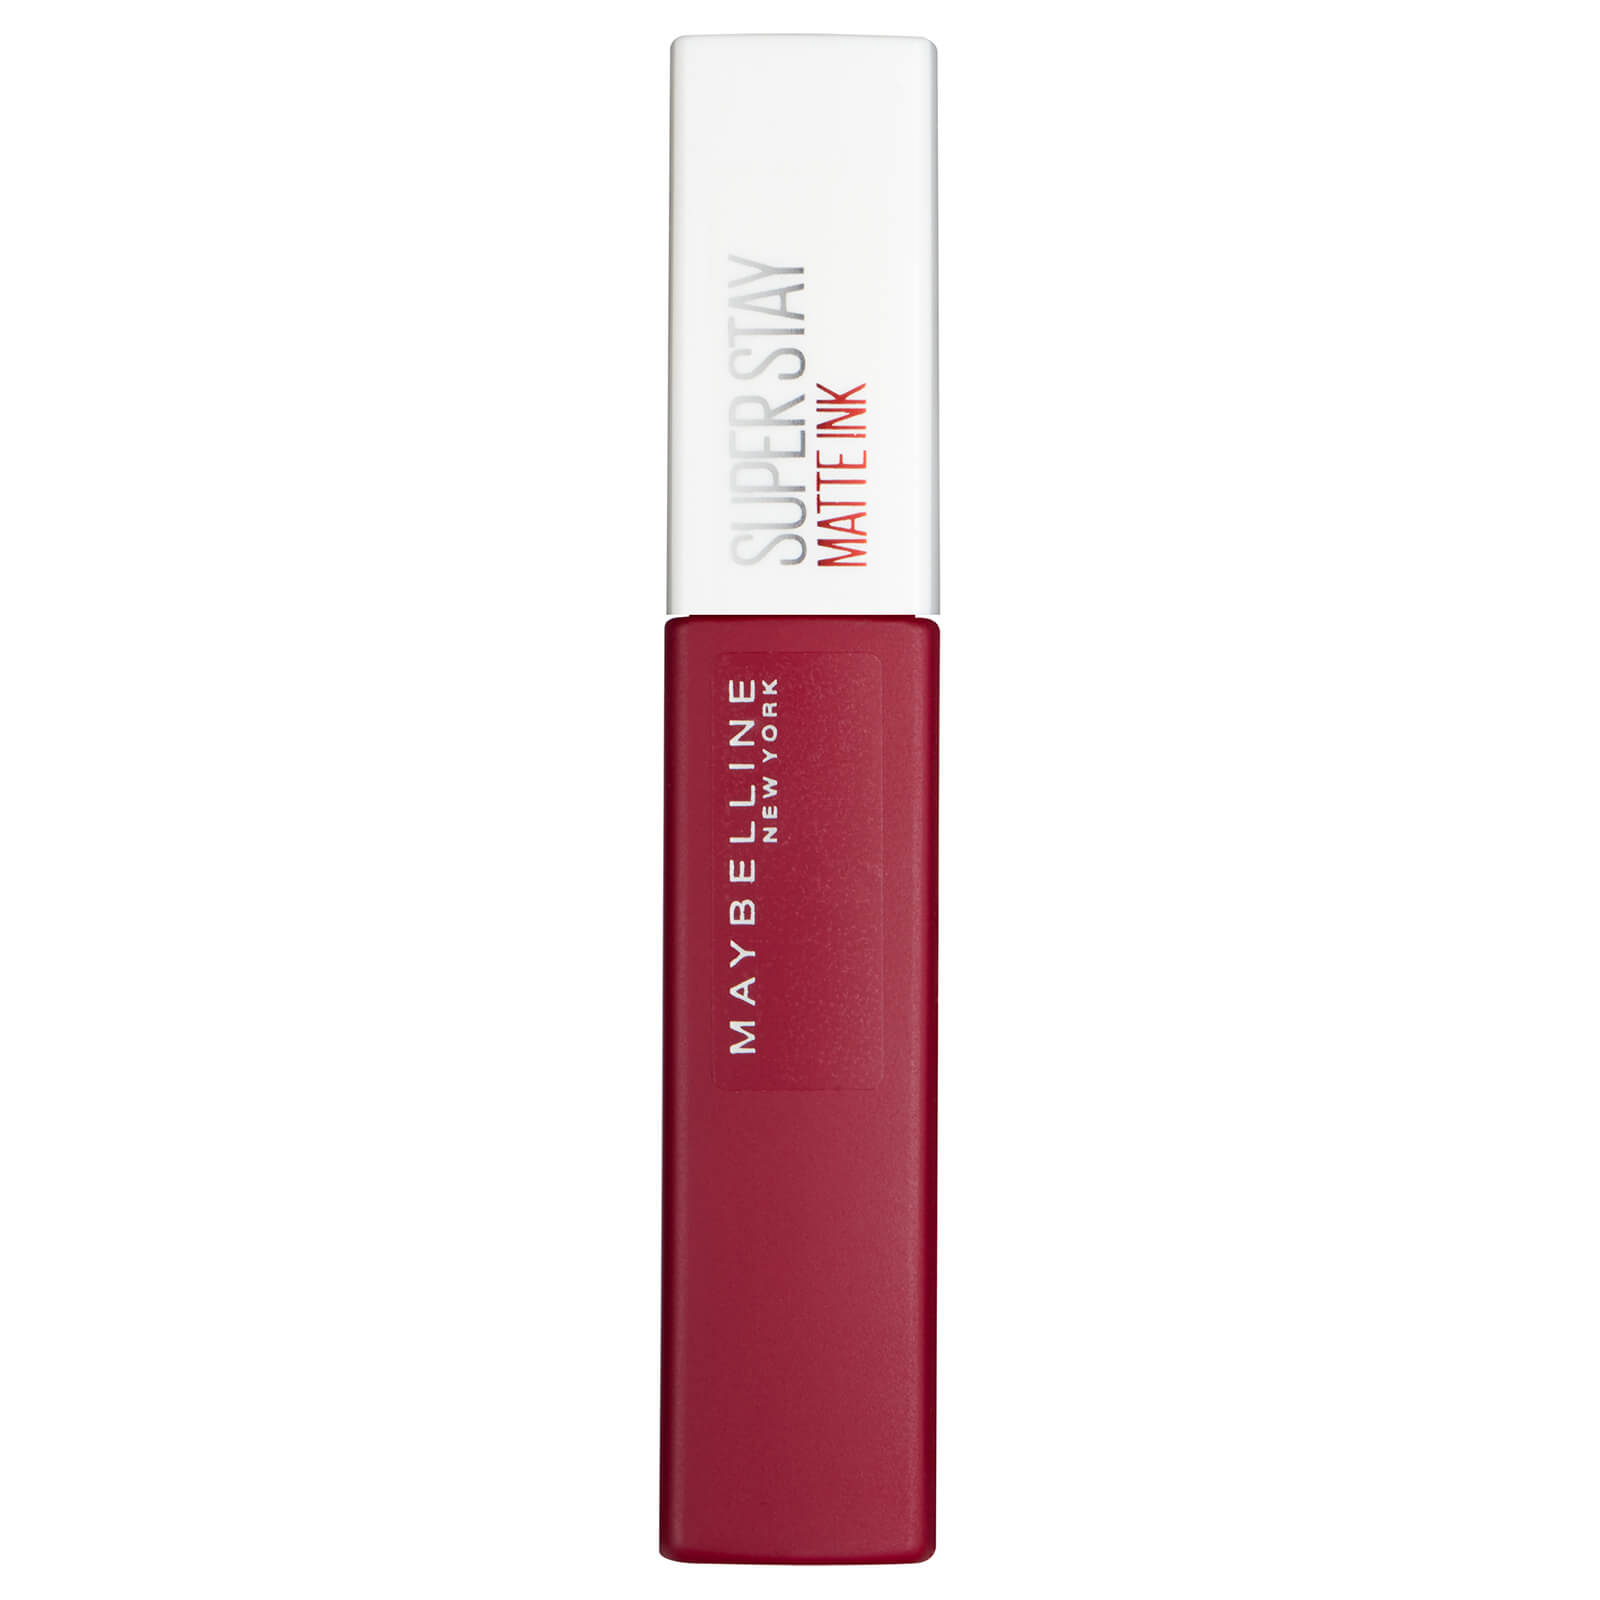 Image of Maybelline Superstay 24 Matte Ink rossetto liquido effetto matte (varie tonalità) - 50 Voyager